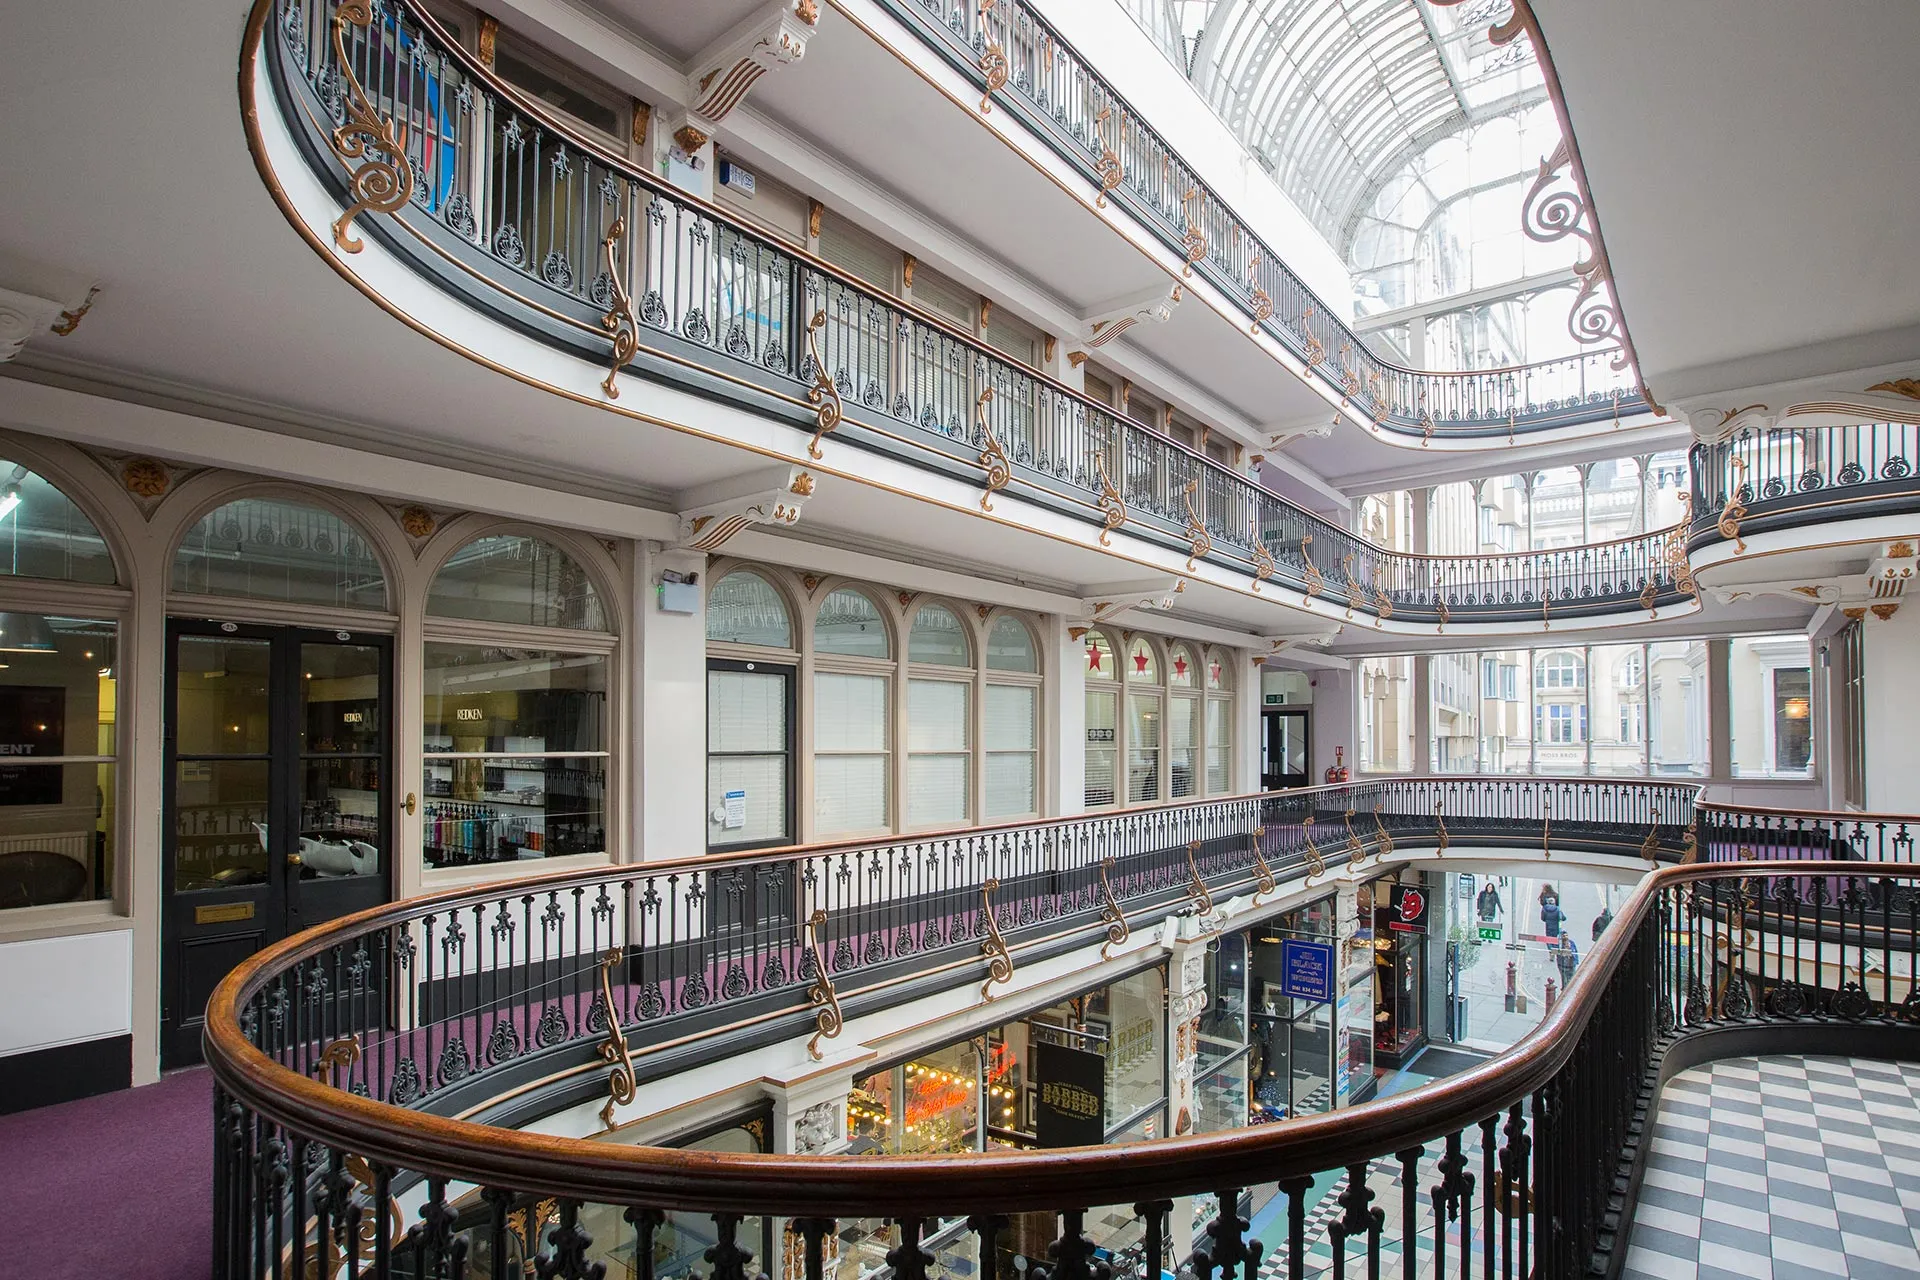 Barton Arcade in United Kingdom, europe | Fragrance,Handbags,Shoes,Accessories,Clothes,Natural Beauty Products,Watches,Jewelry - Country Helper